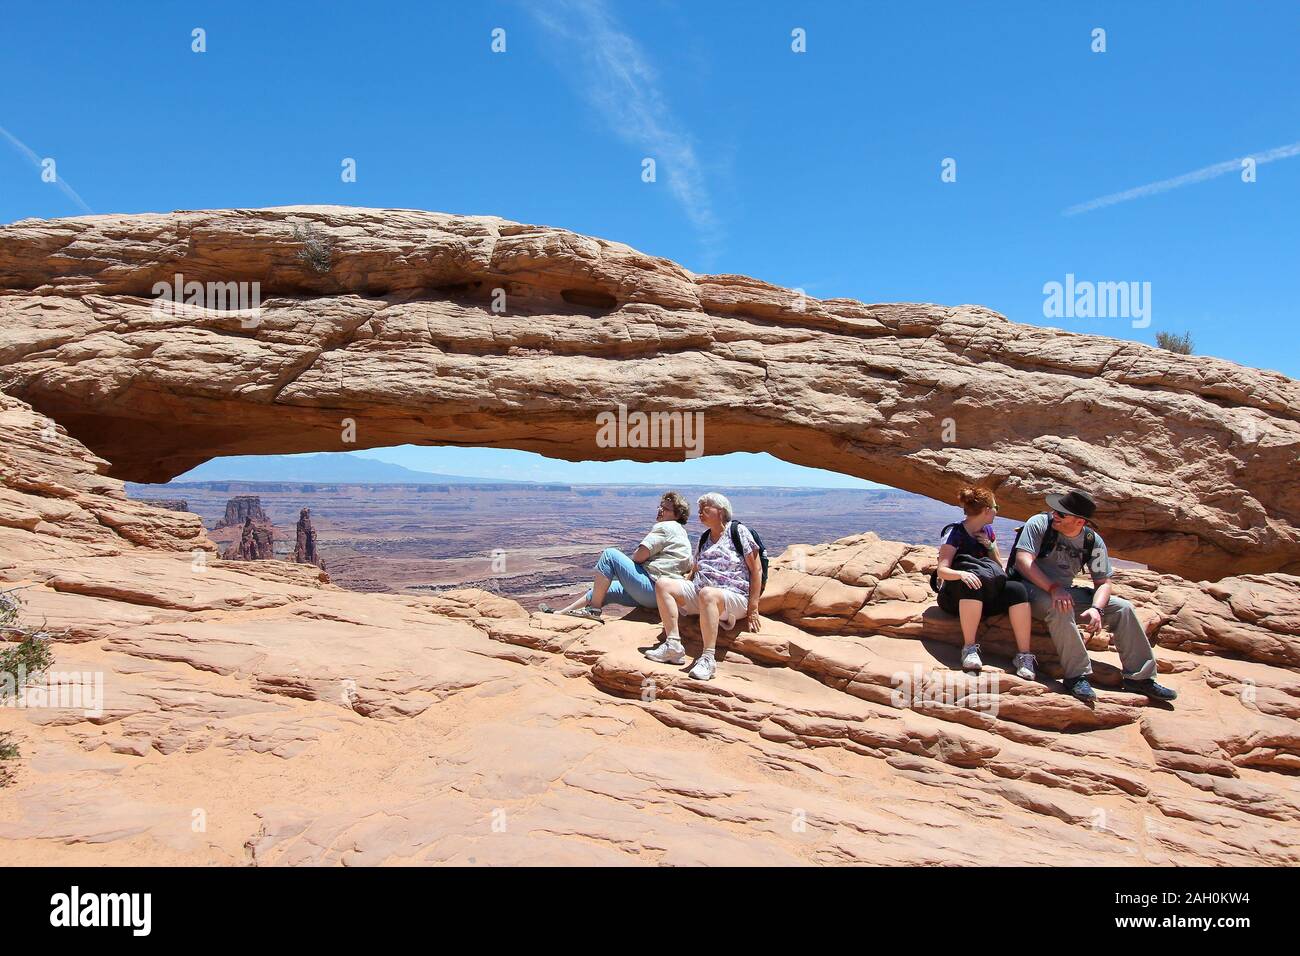 CANYONLANDS, UNITED STATES - JUNE 22, 2013: People visit Mesa Arch in Canyonlands National Park, USA. More than 452,000 people visited Canyonlands NP Stock Photo